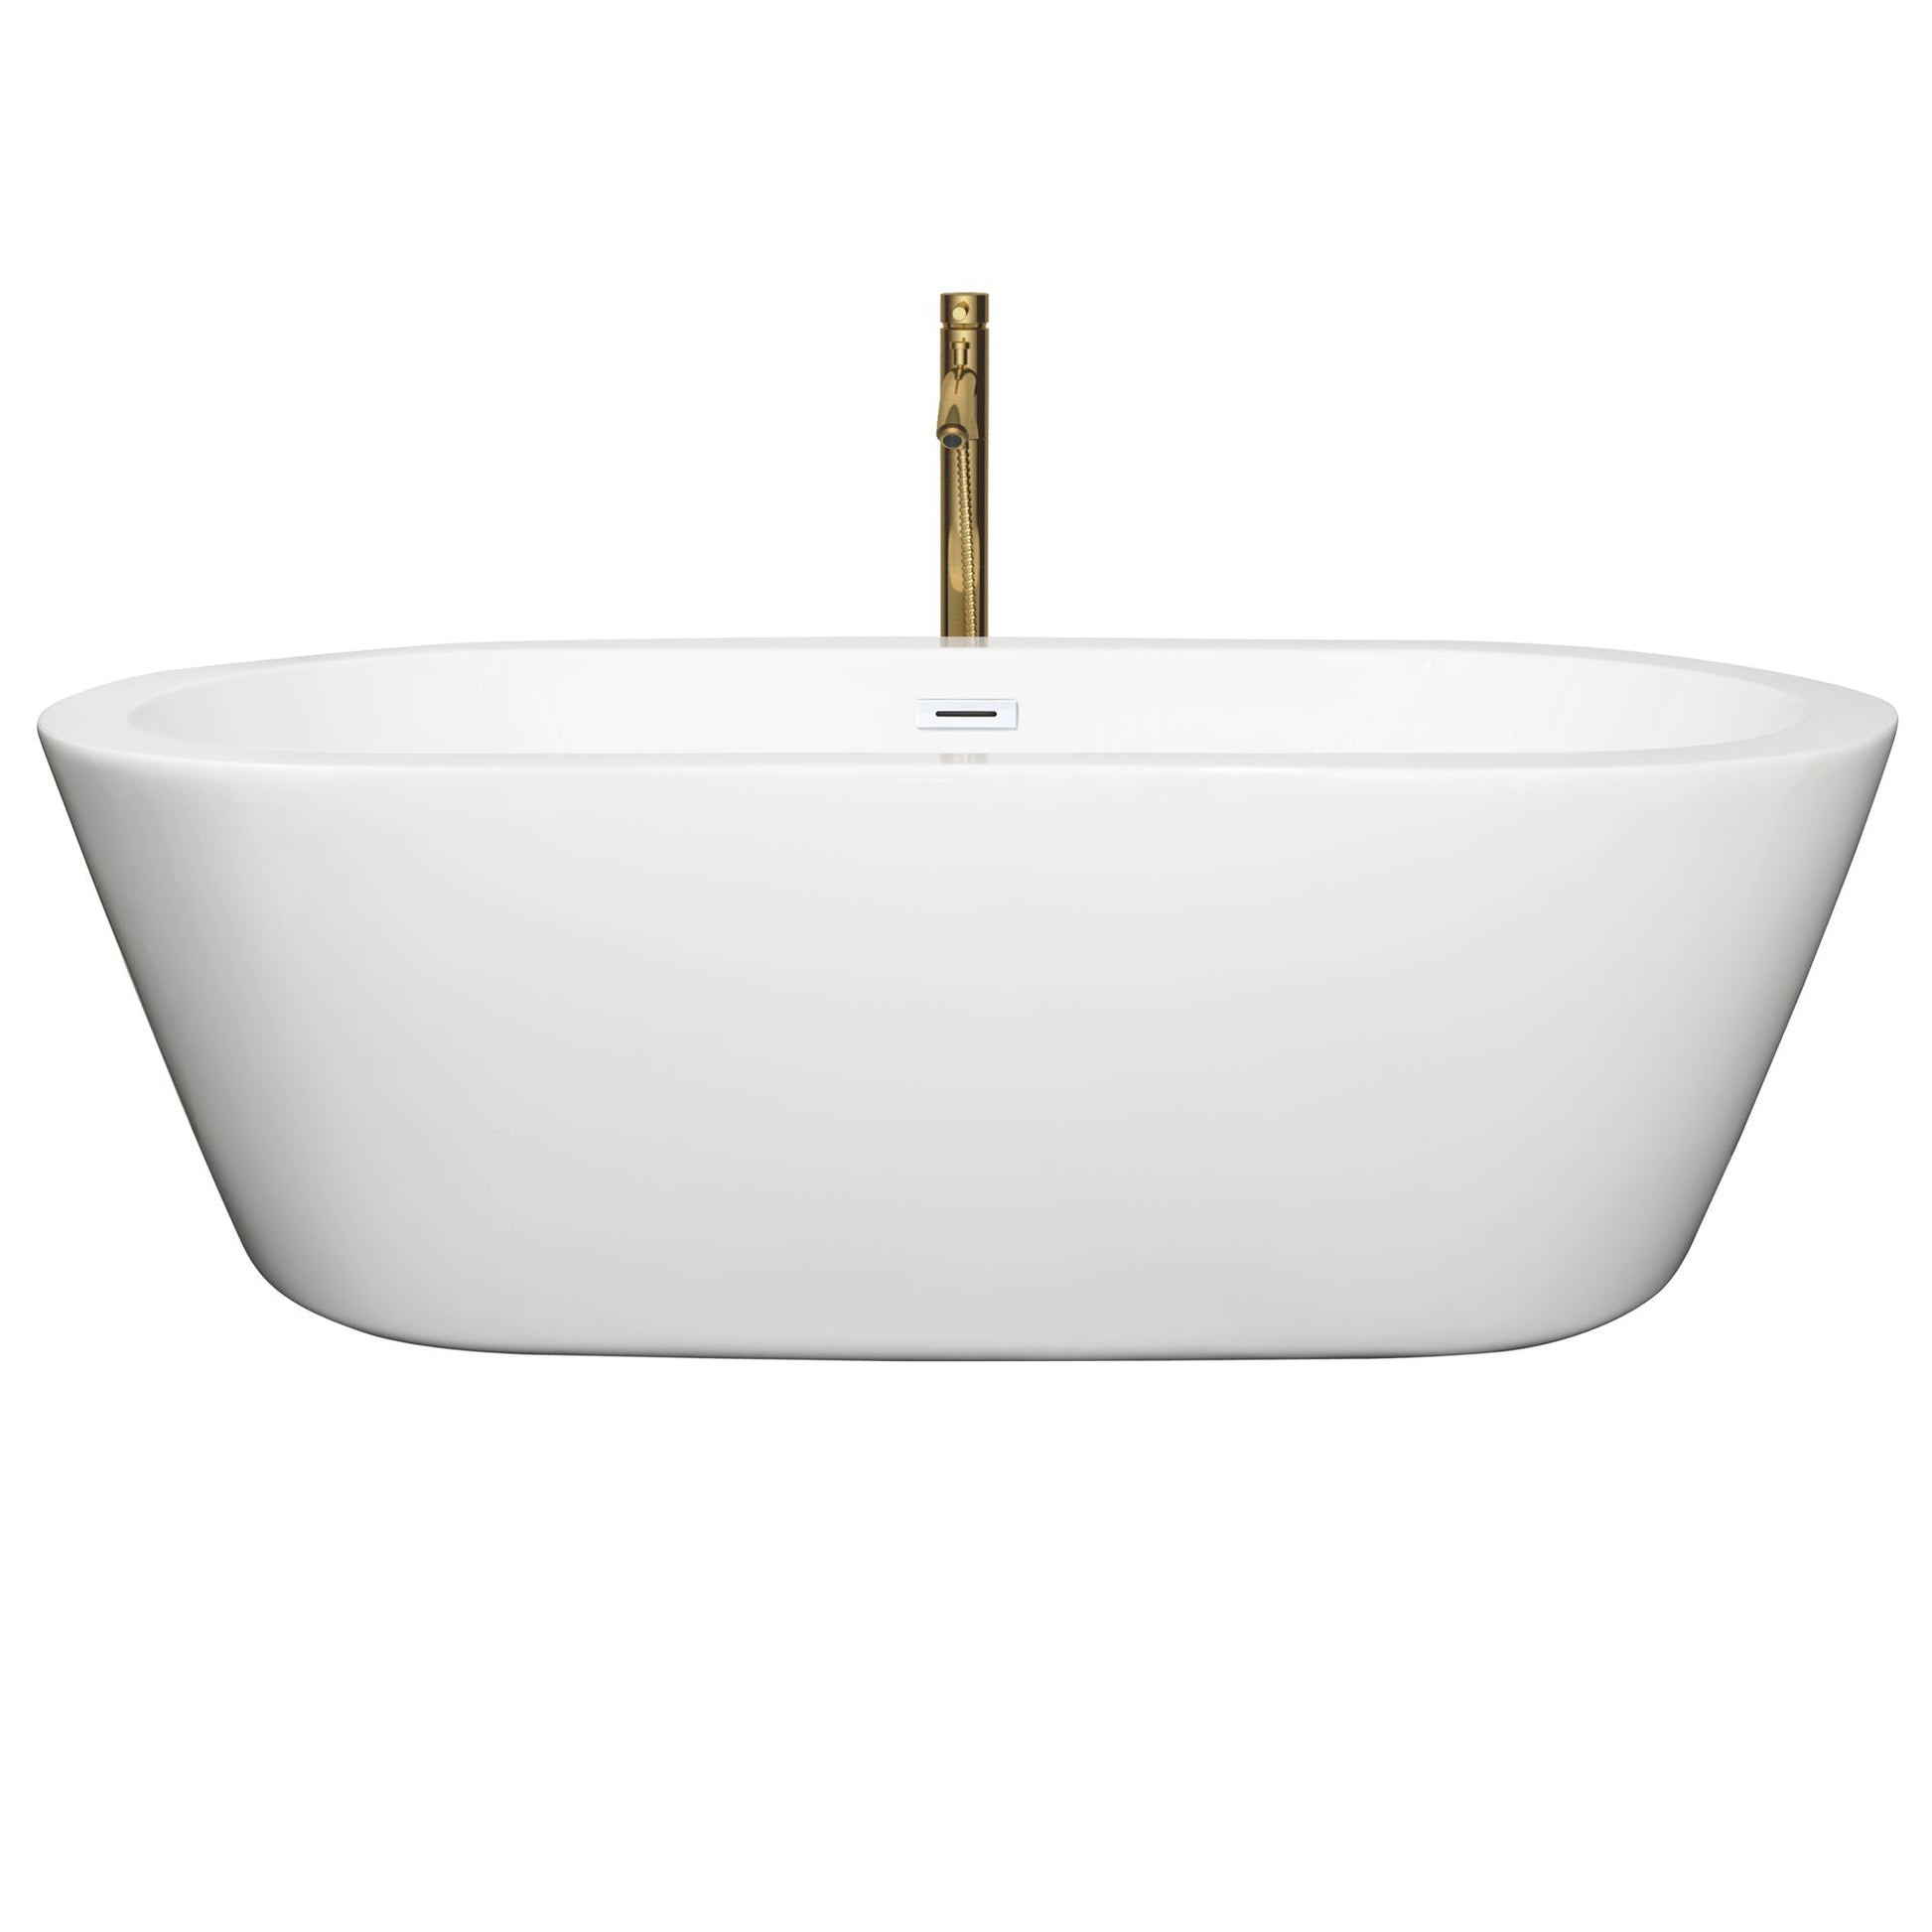 Wyndham Collection Mermaid 71" Freestanding Bathtub in White With Shiny White Trim and Floor Mounted Faucet in Brushed Gold